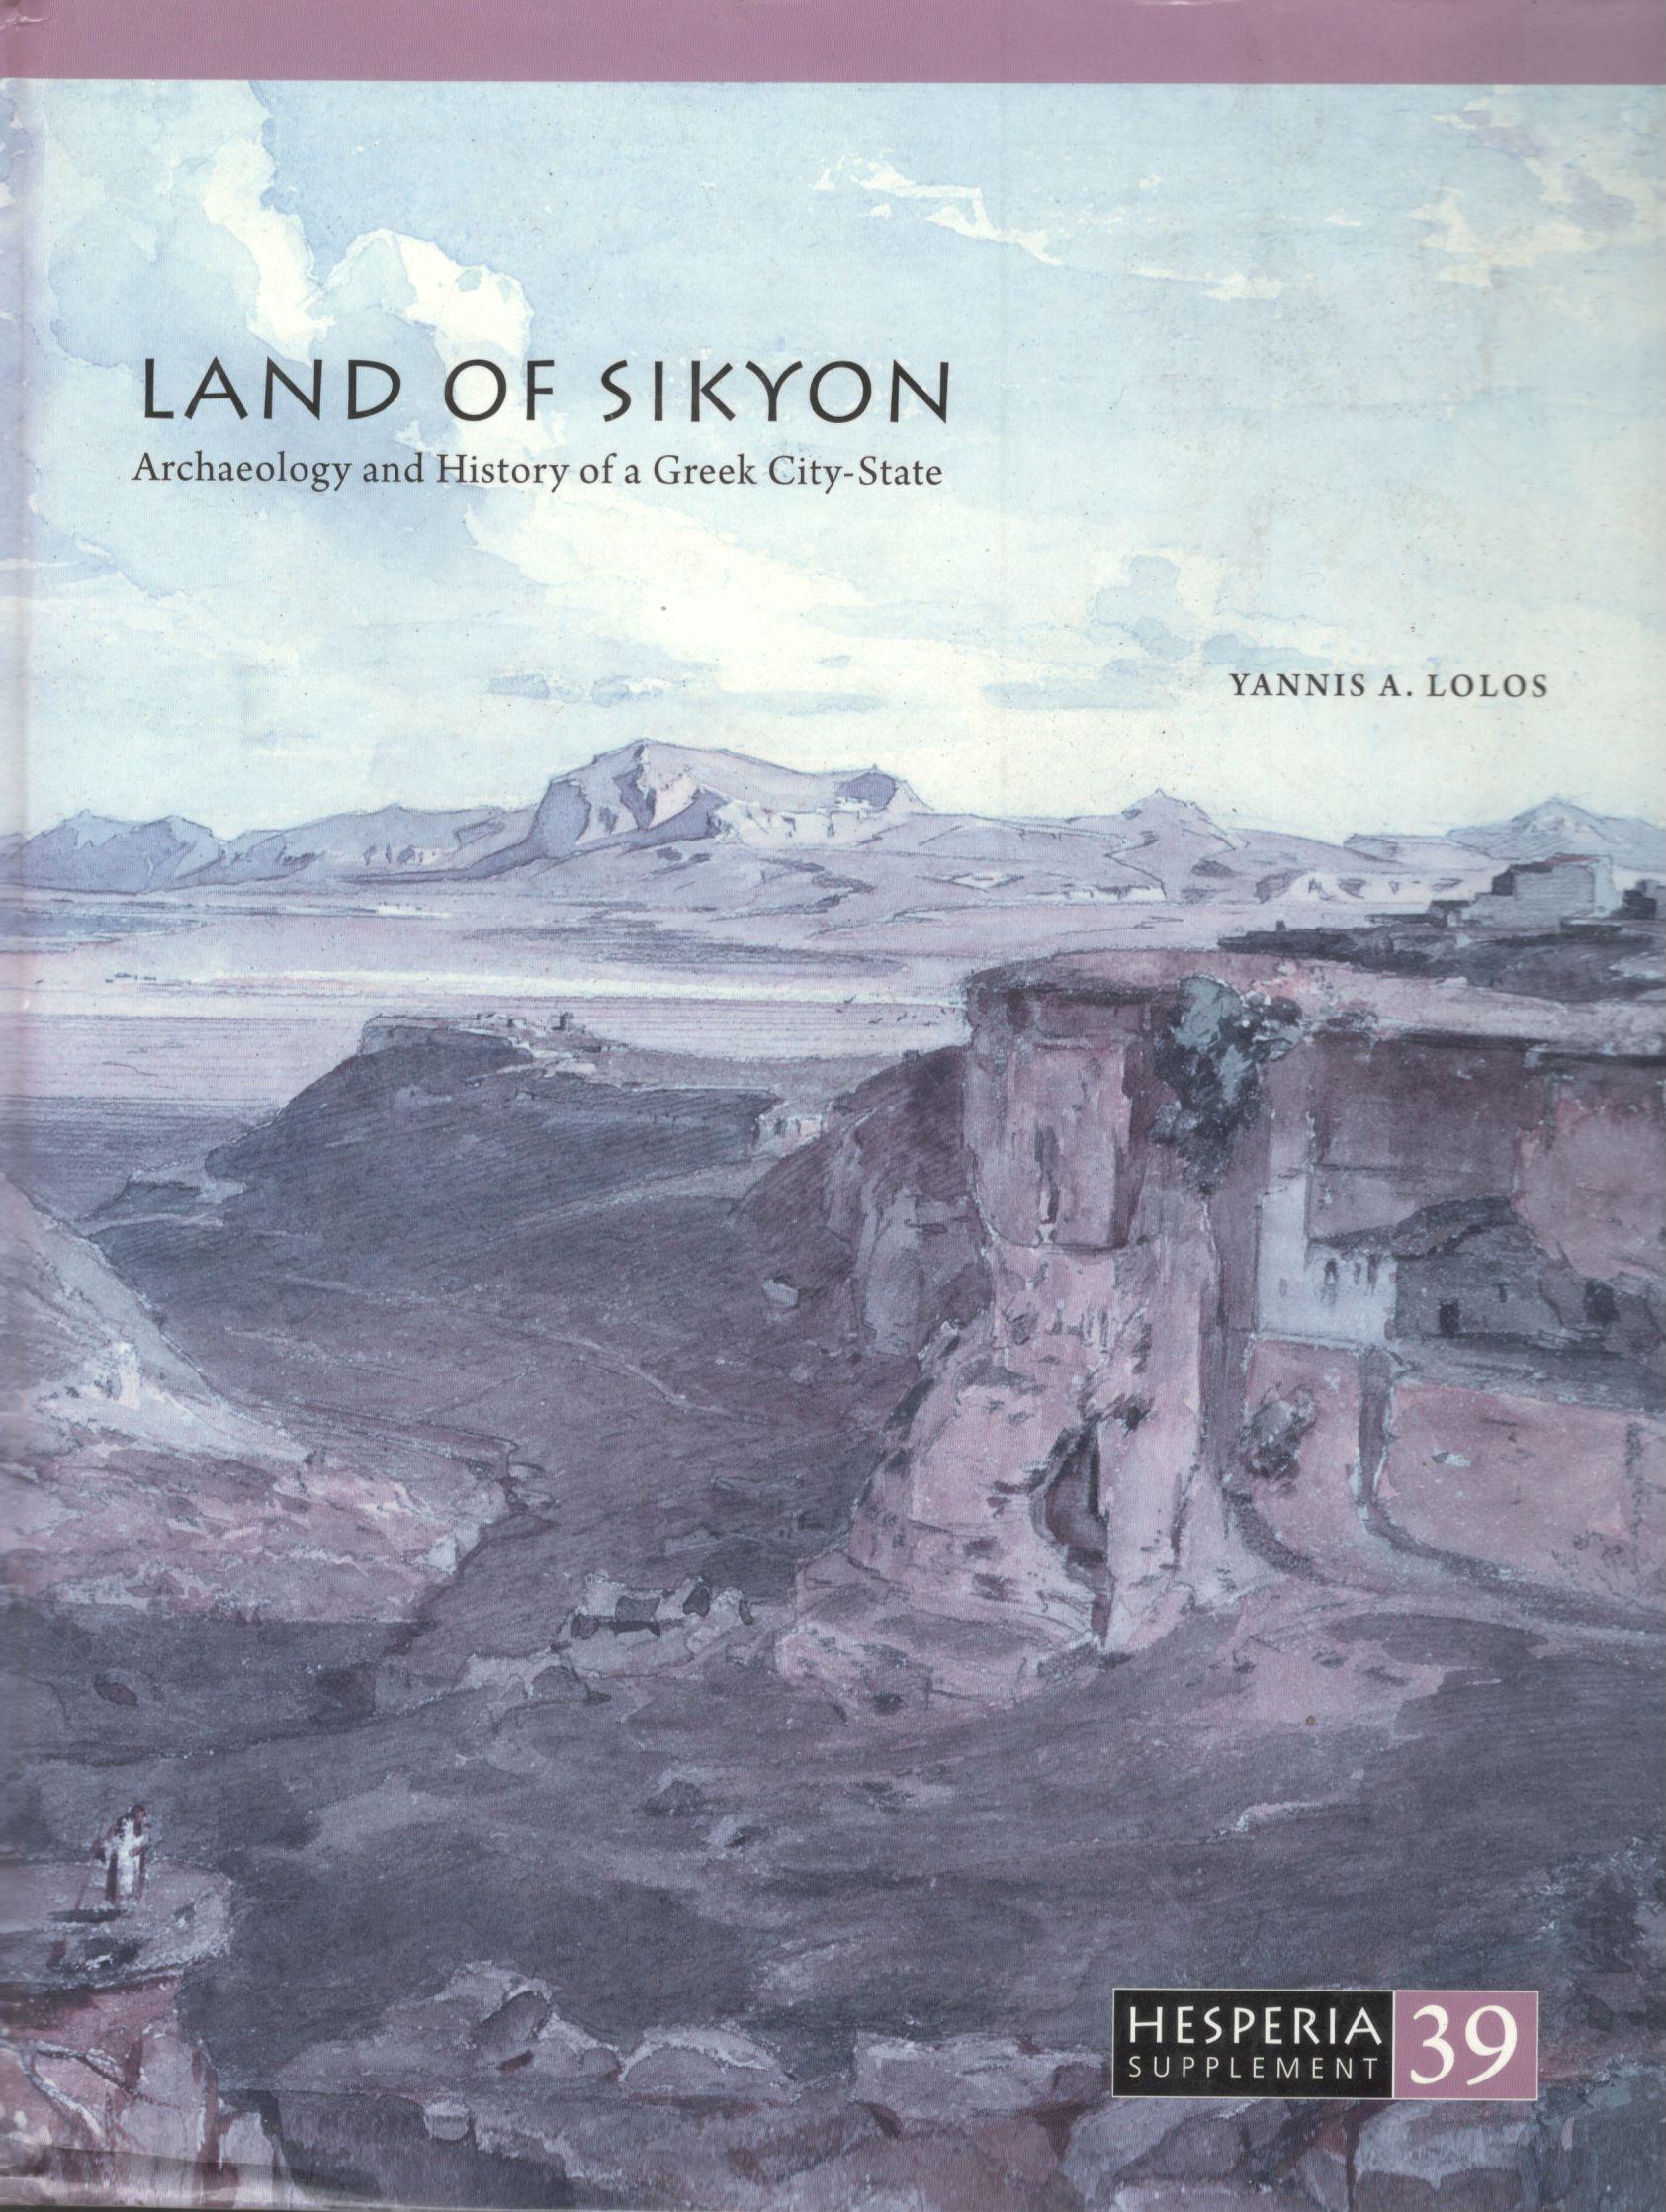 HESPERIA SUPPLEMENT 39: THE LAND OF SIKYON